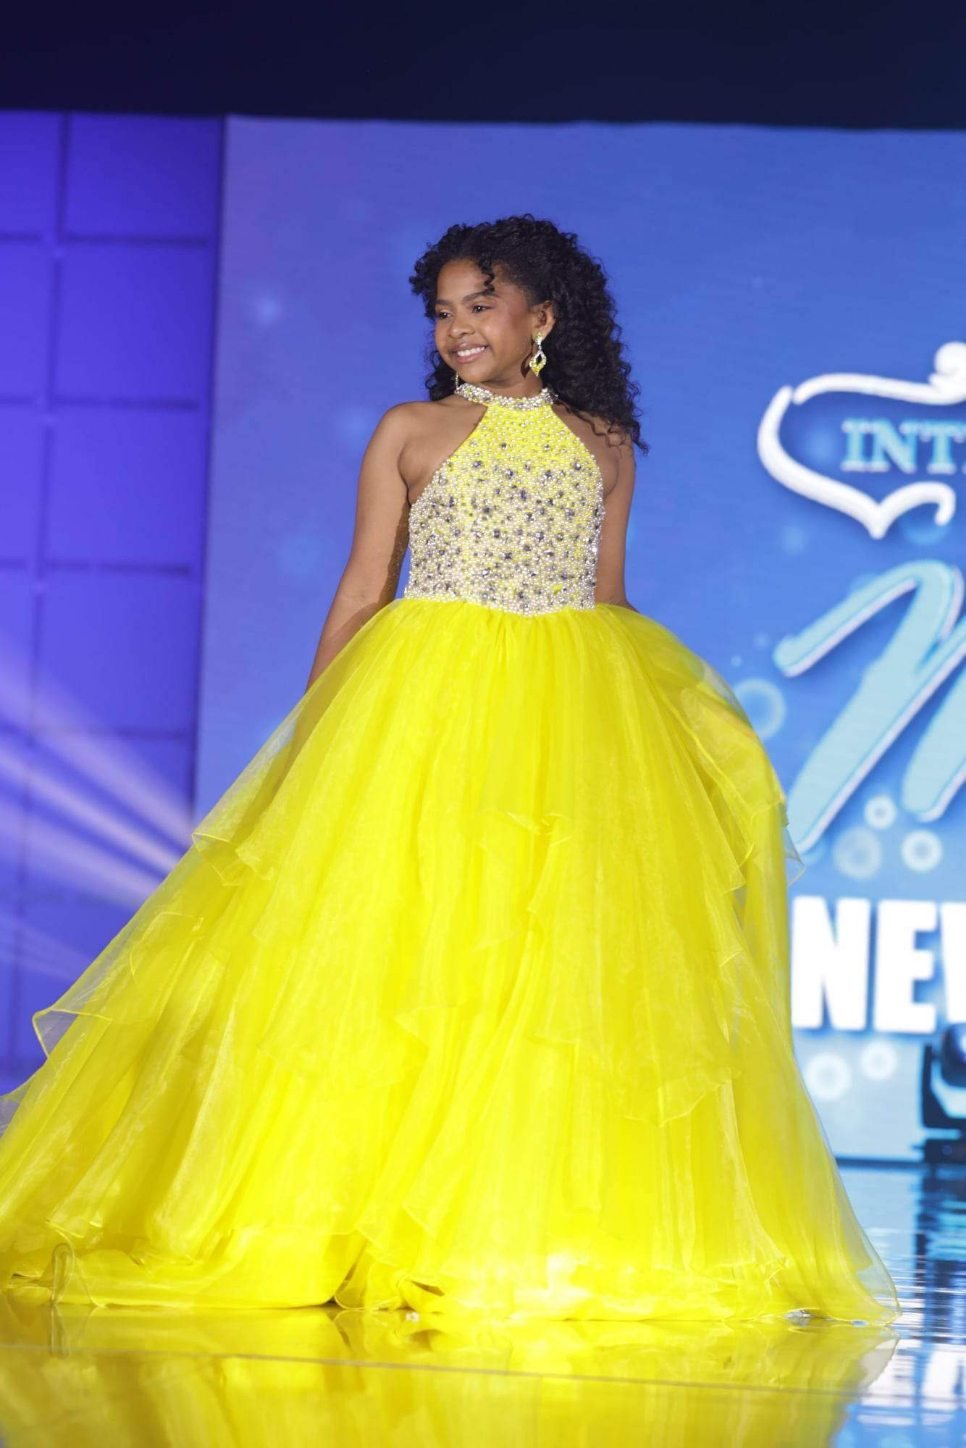 Selene Ferdinand competing in a beauty pageant. Pageants is where she discovered her passion for volunteerism.